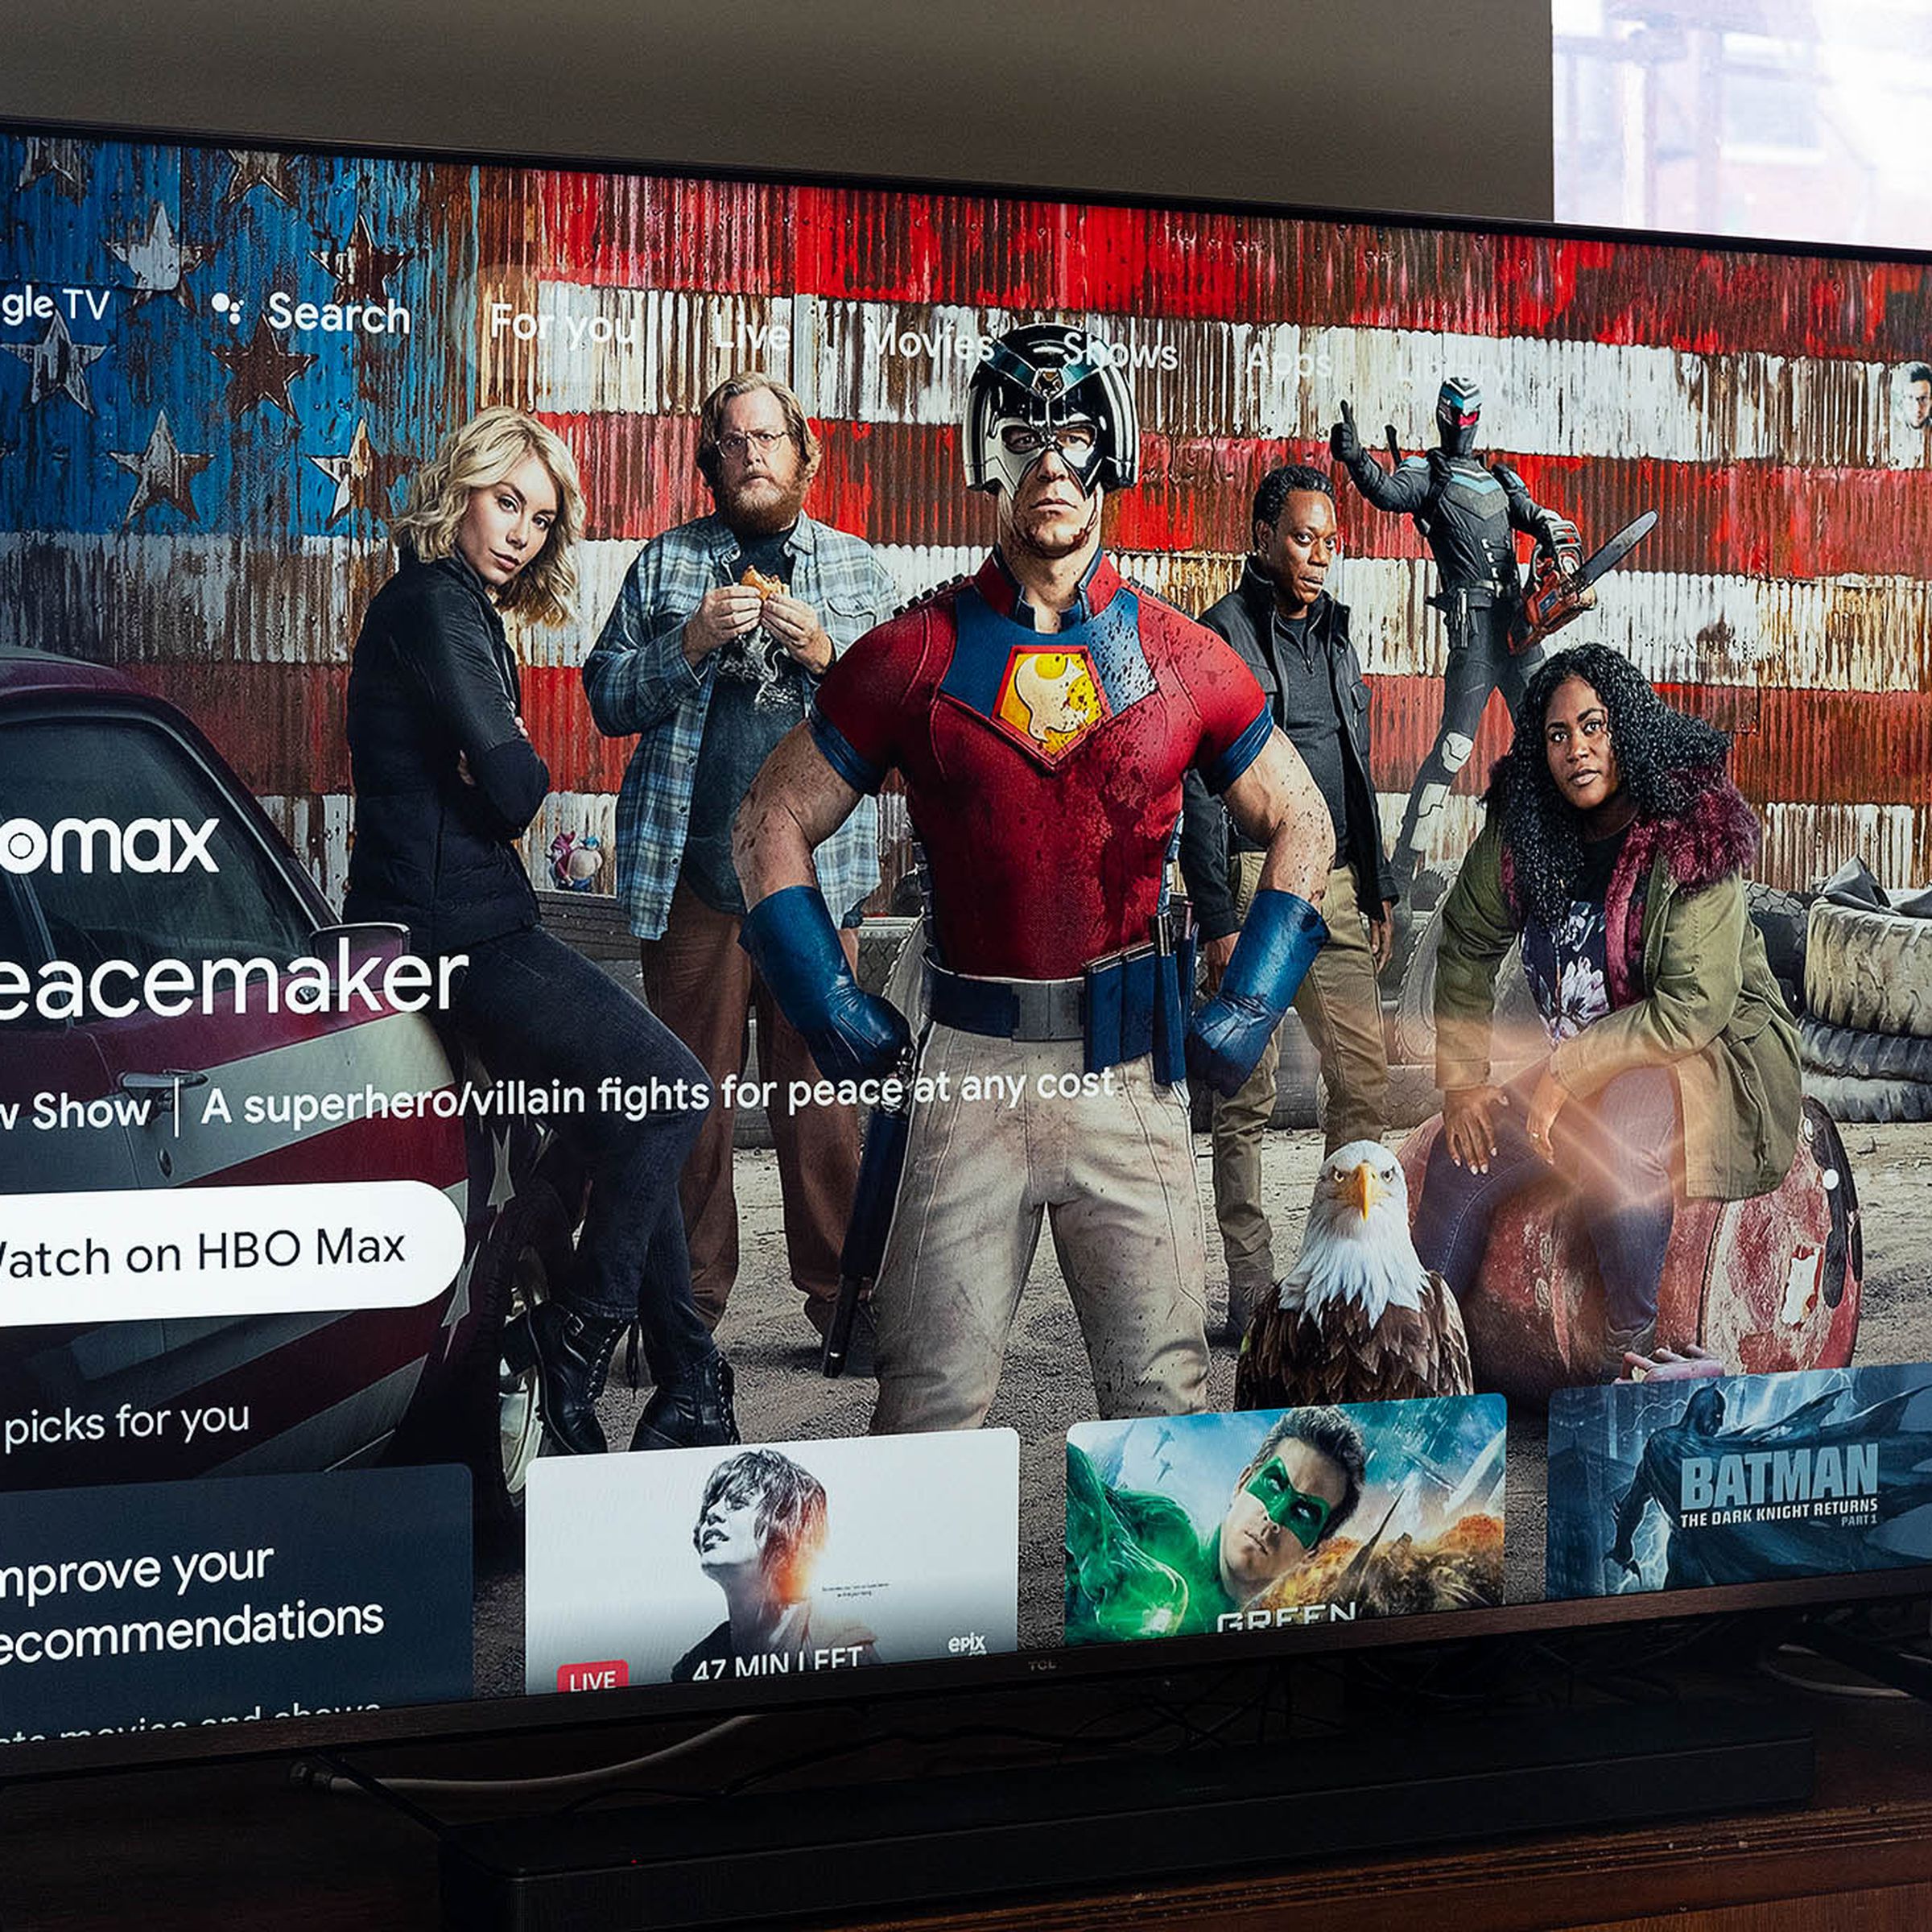 The 55-inch TCL 6-series R646 4K TV is on, displaying the Google TV software homescreen that’s filled with viewing recommendations.